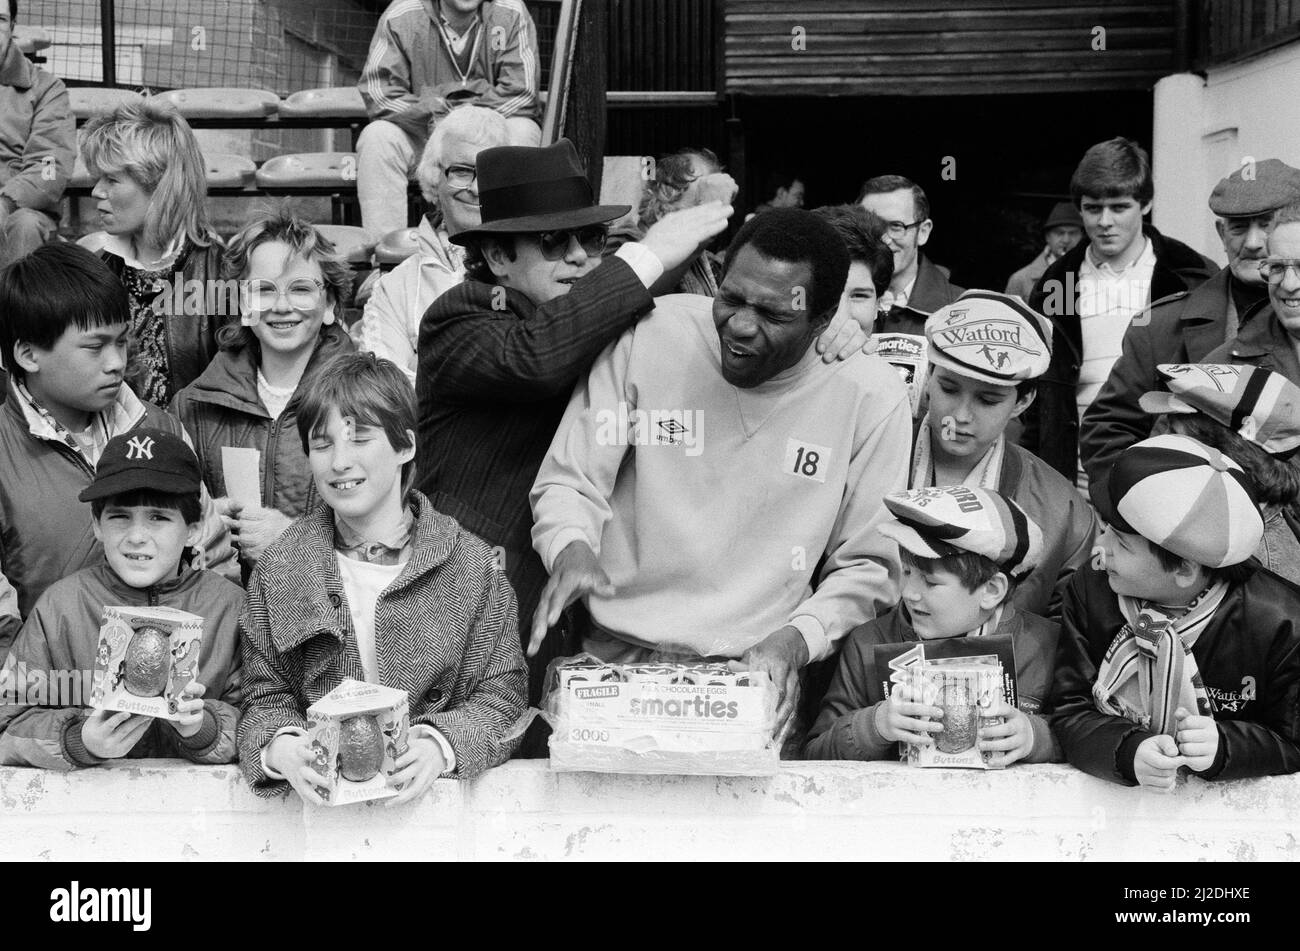 Pop star and Watford FC Chairman, Elton John, handing out Easter eggs to fans and clowning around with Luther Blissett. Watford v Southampton football match. 6th April 1985. Stock Photo